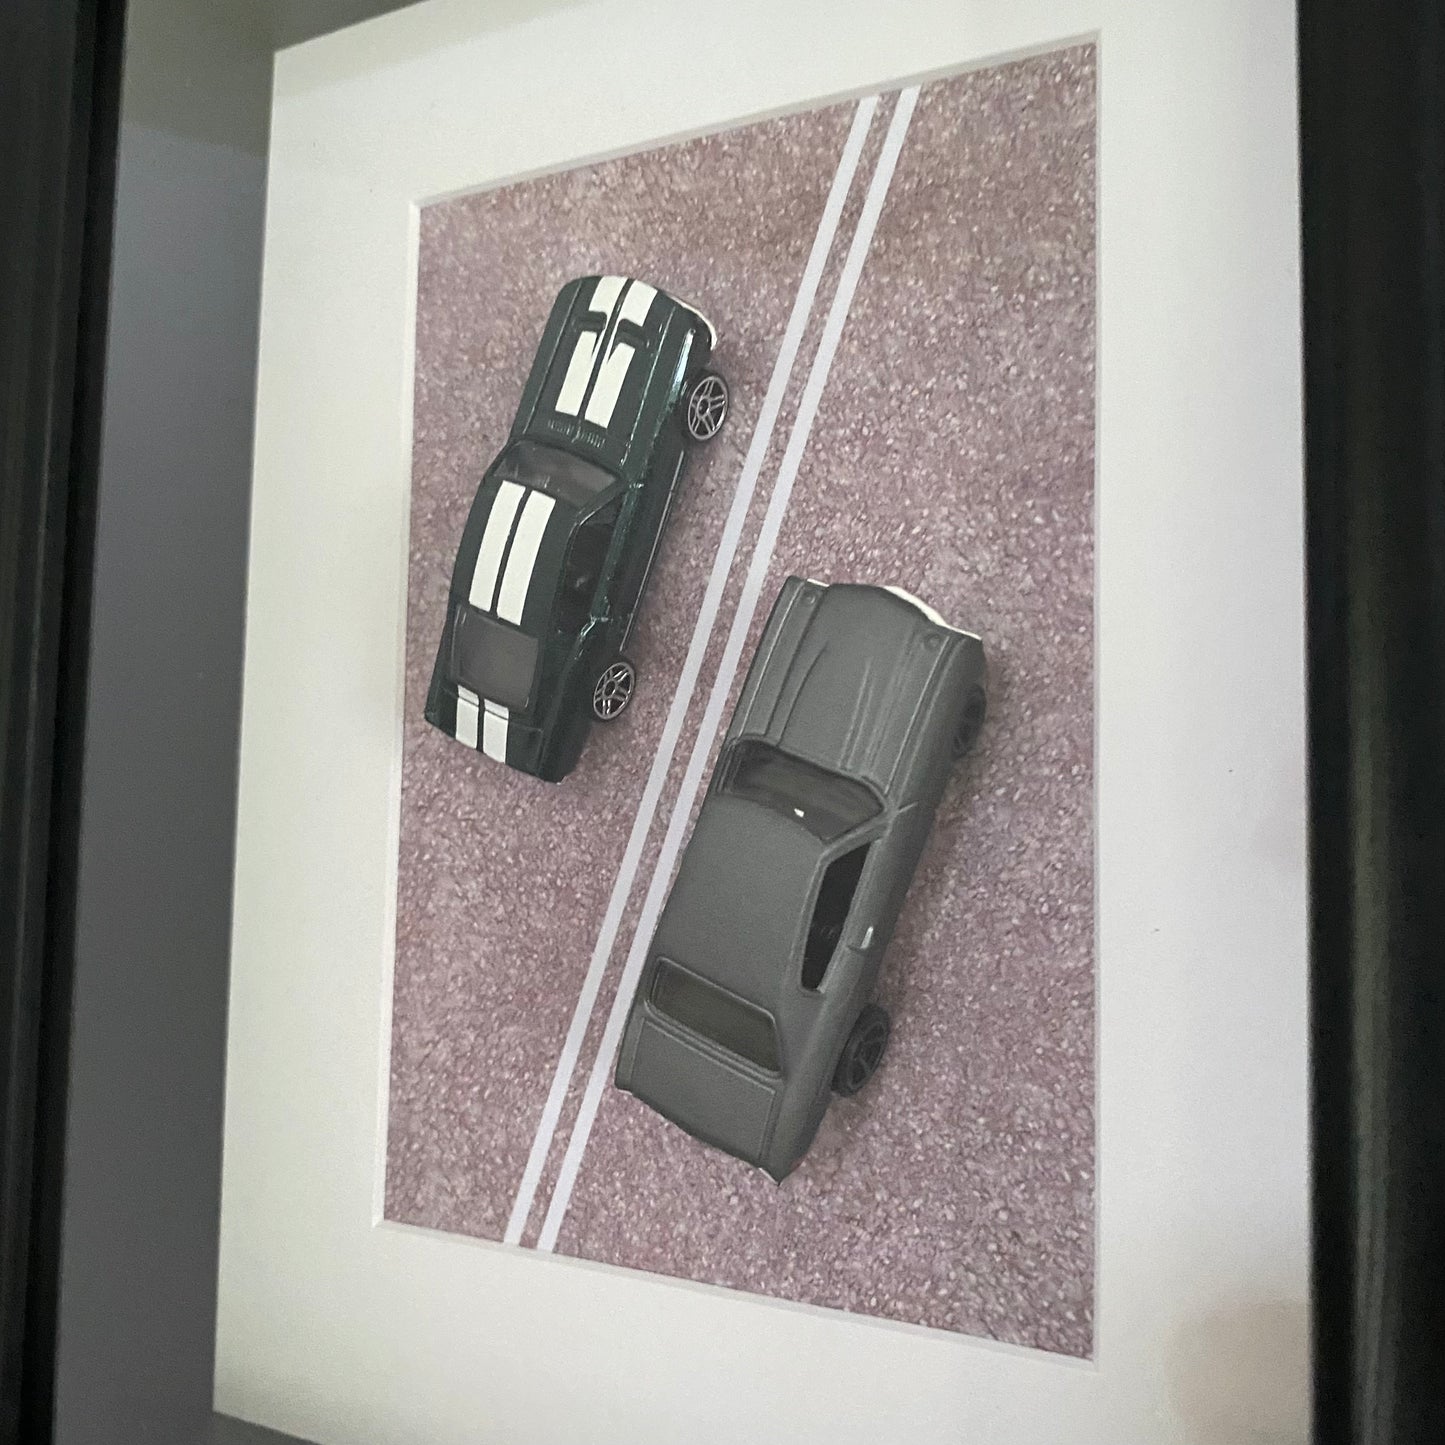 WALL ART - HOT WHEELS ‘67 Mustang & ‘70 Chevelle Mounted In Frame (28x23 cm) N00